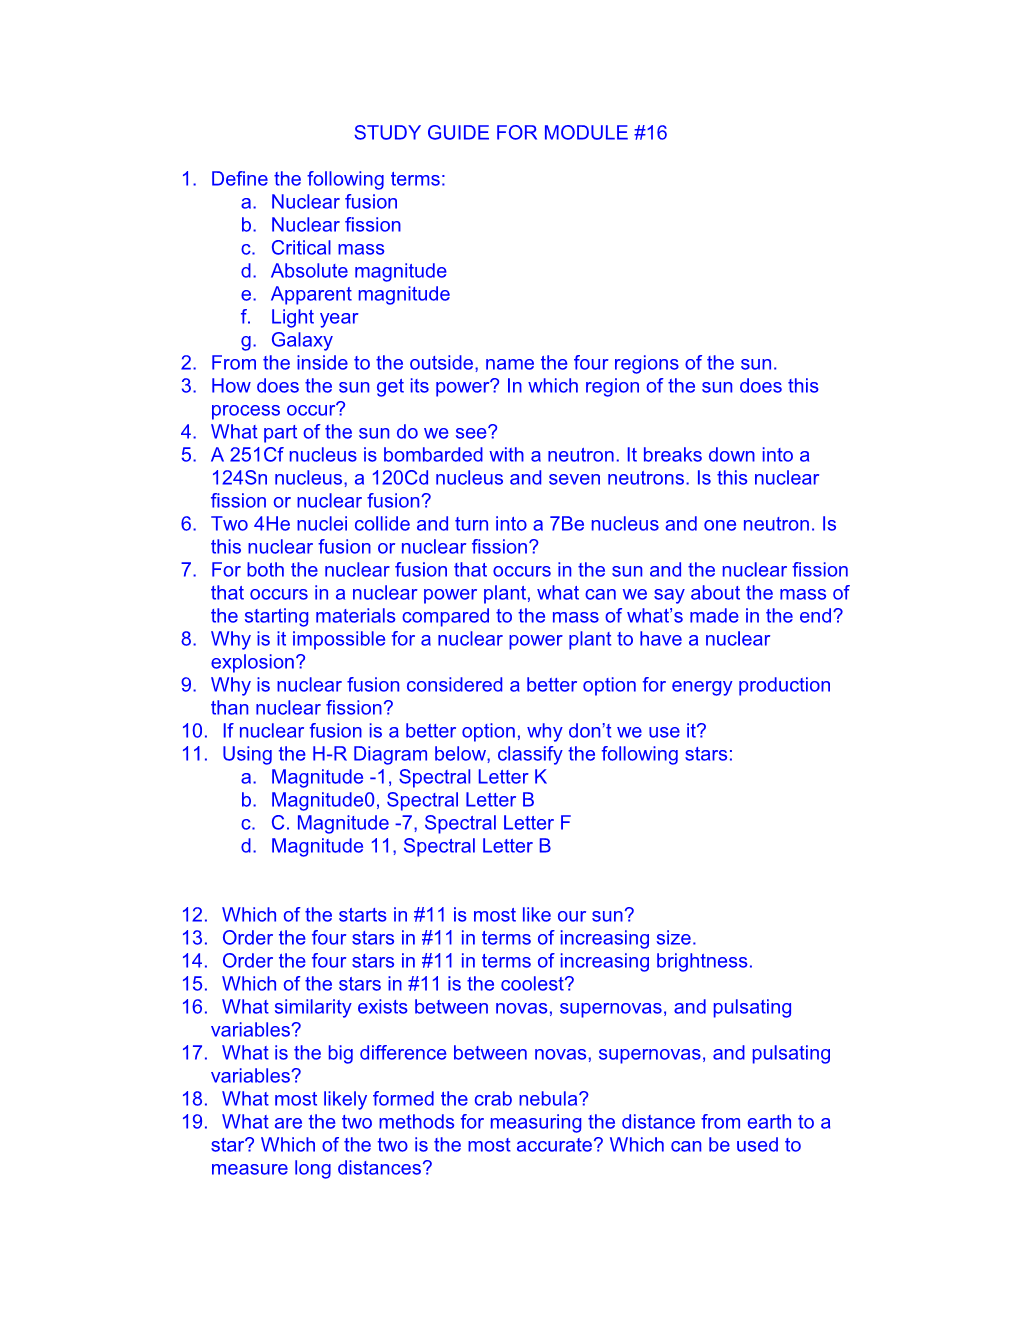 Study Guide for Module #14